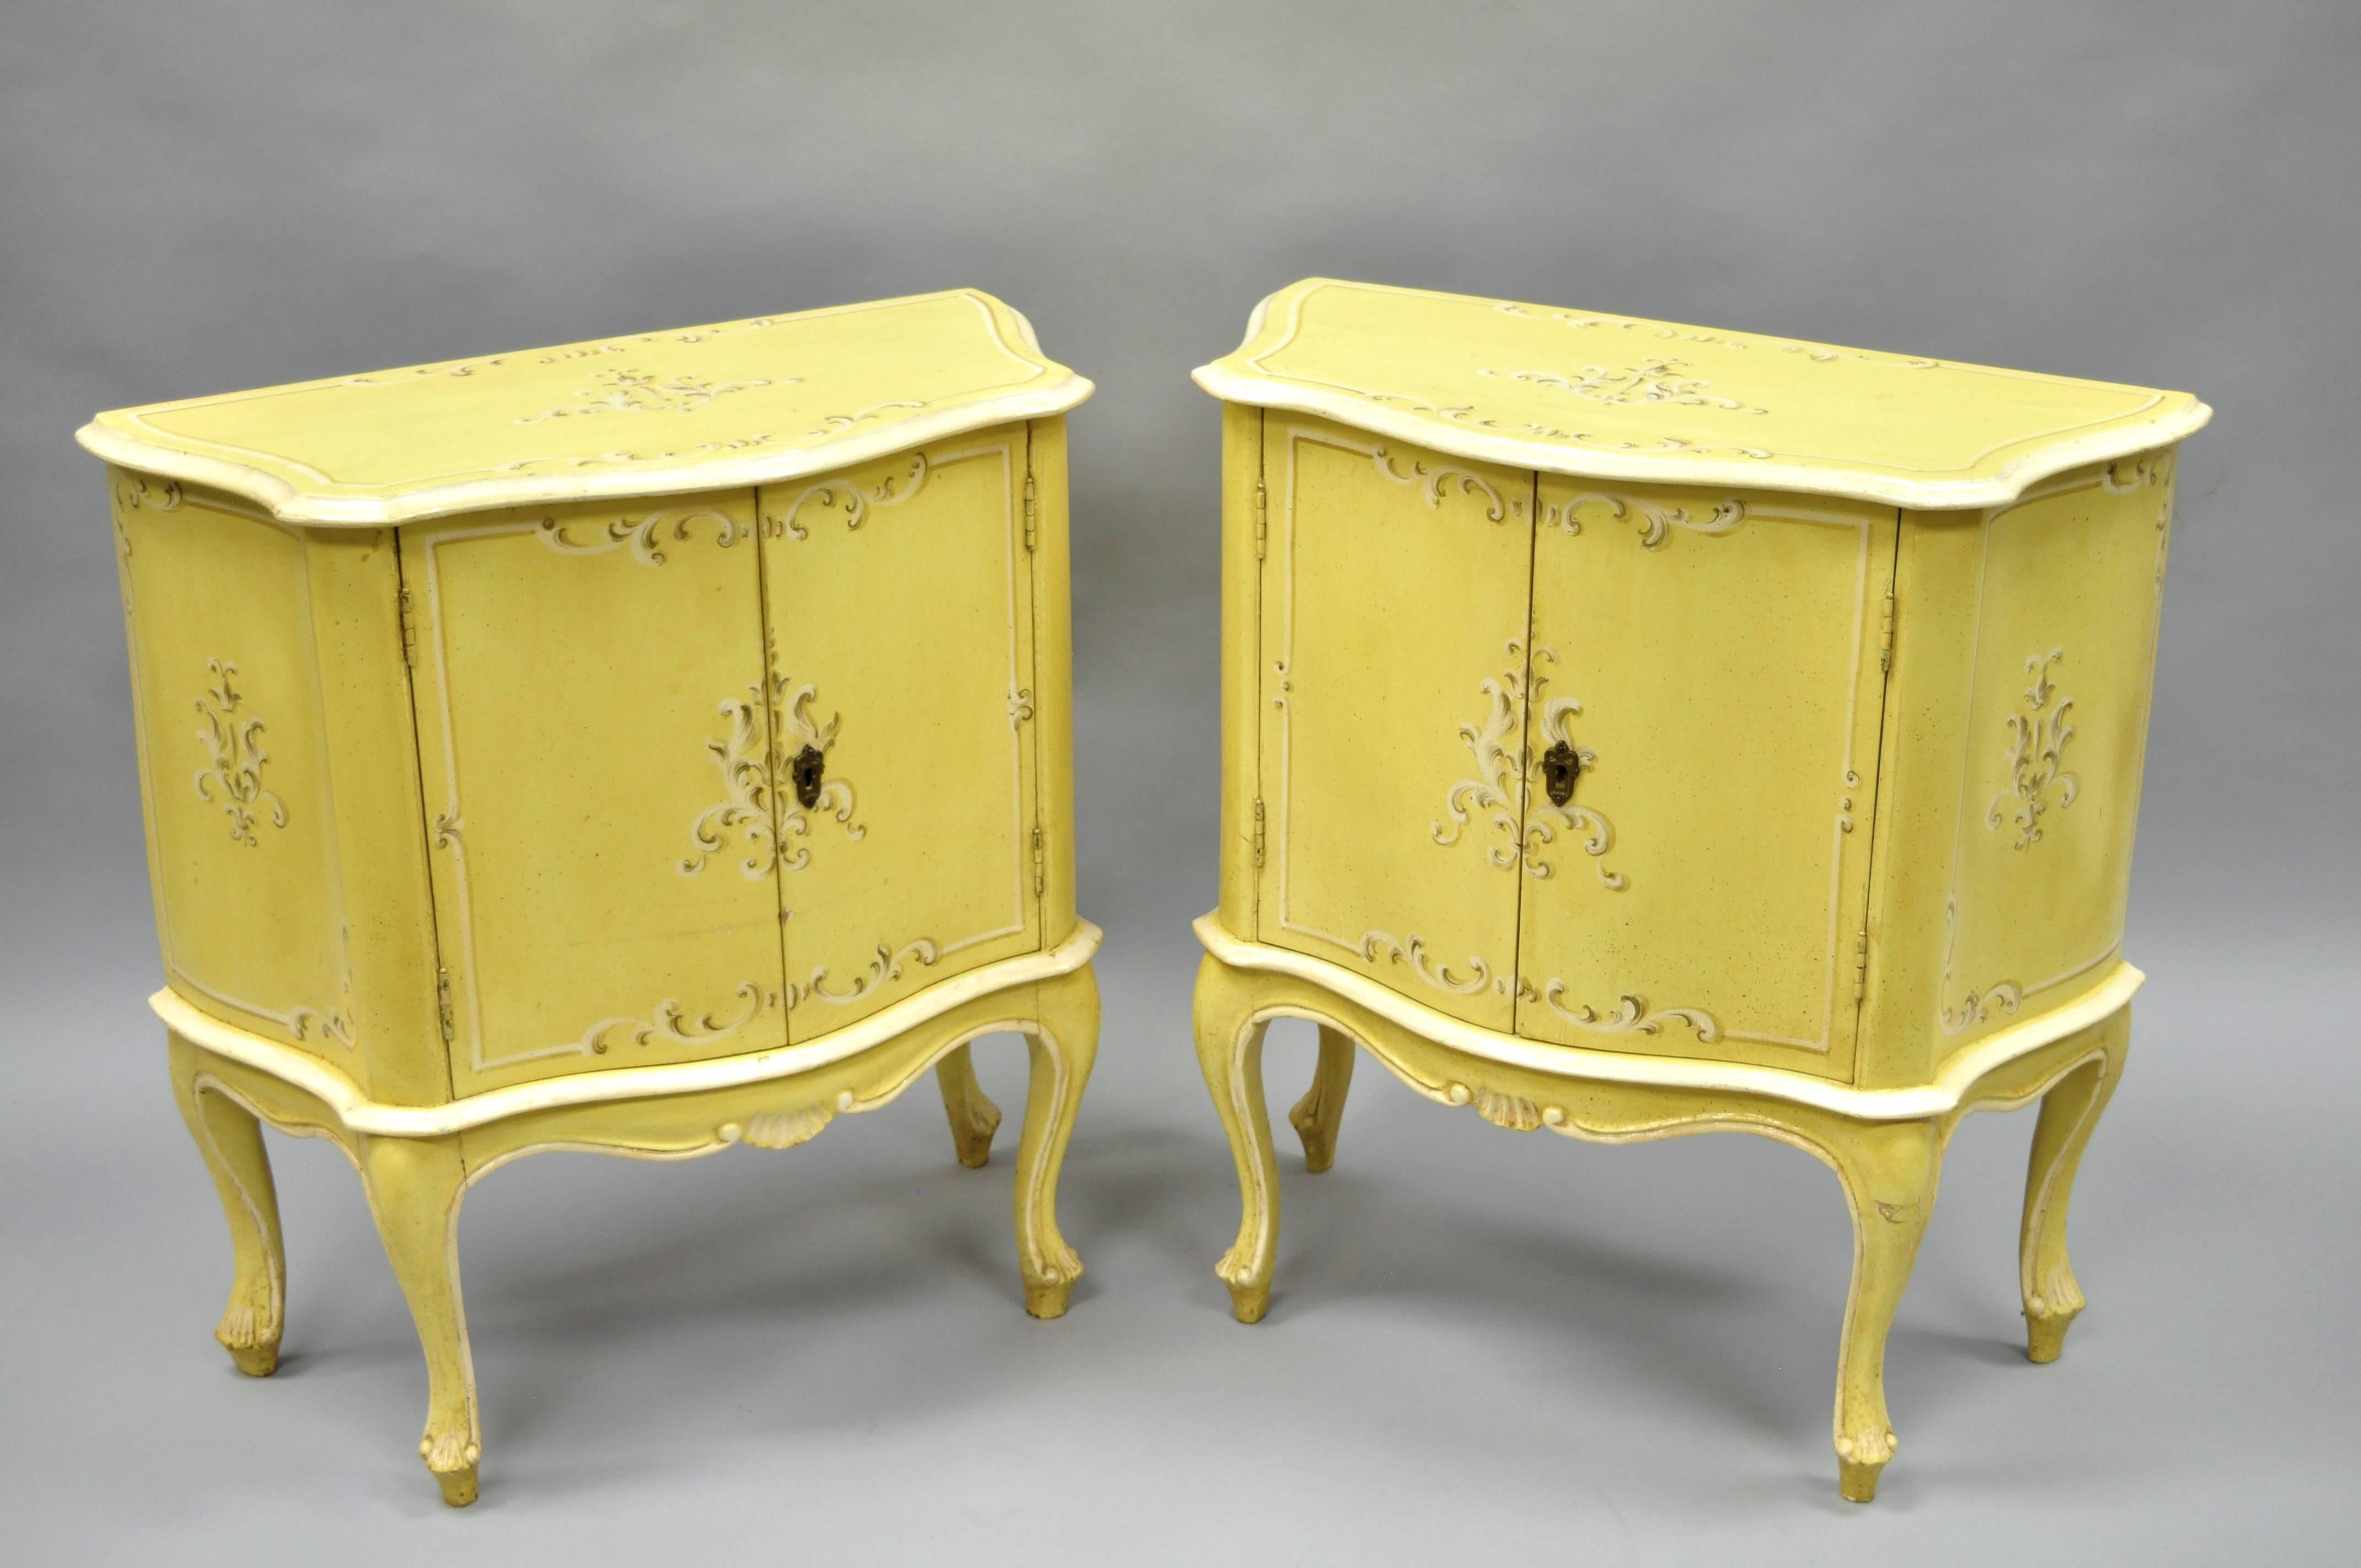 Pair of vintage petite Italian Florentine / Venetian yellow painted bombe commodes / bedside tables. This adorable pair of tables features an antiqued yellow painted finish with floral details to the face, sides, and tops. Chests further feature an